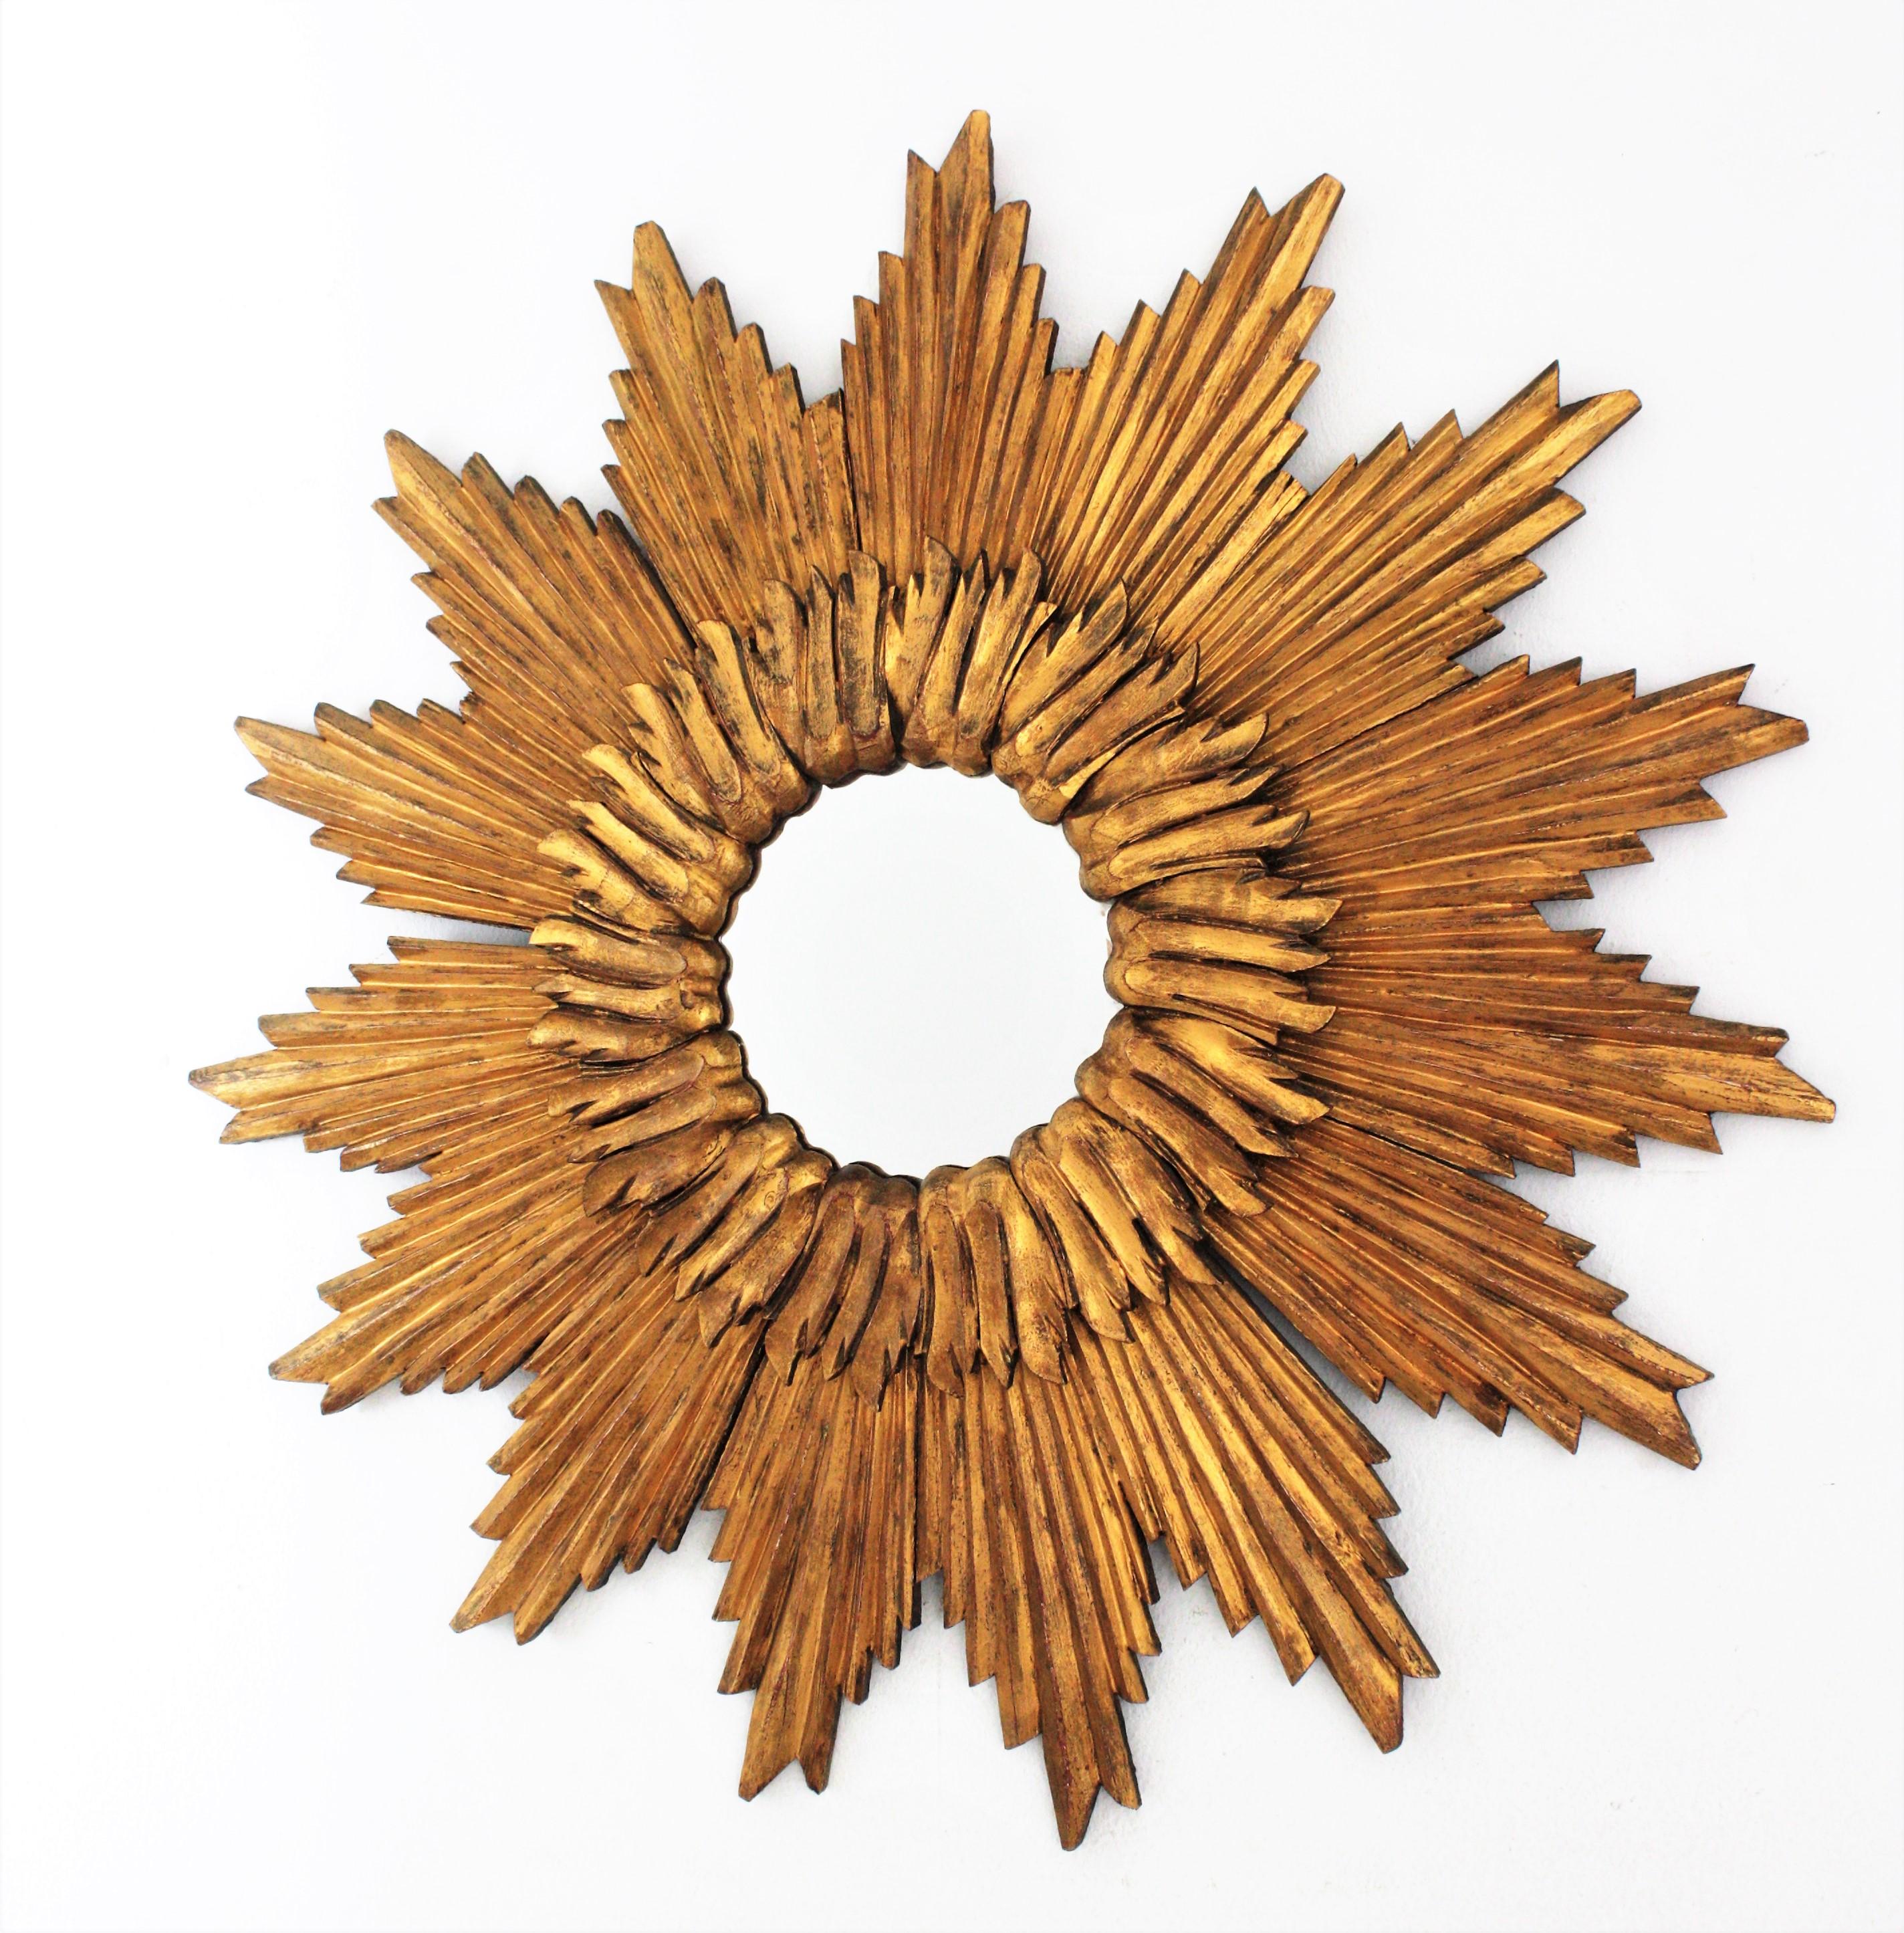 Large French Sunburst Starburst Convex Mirror in Giltwood, 1960s For Sale 1